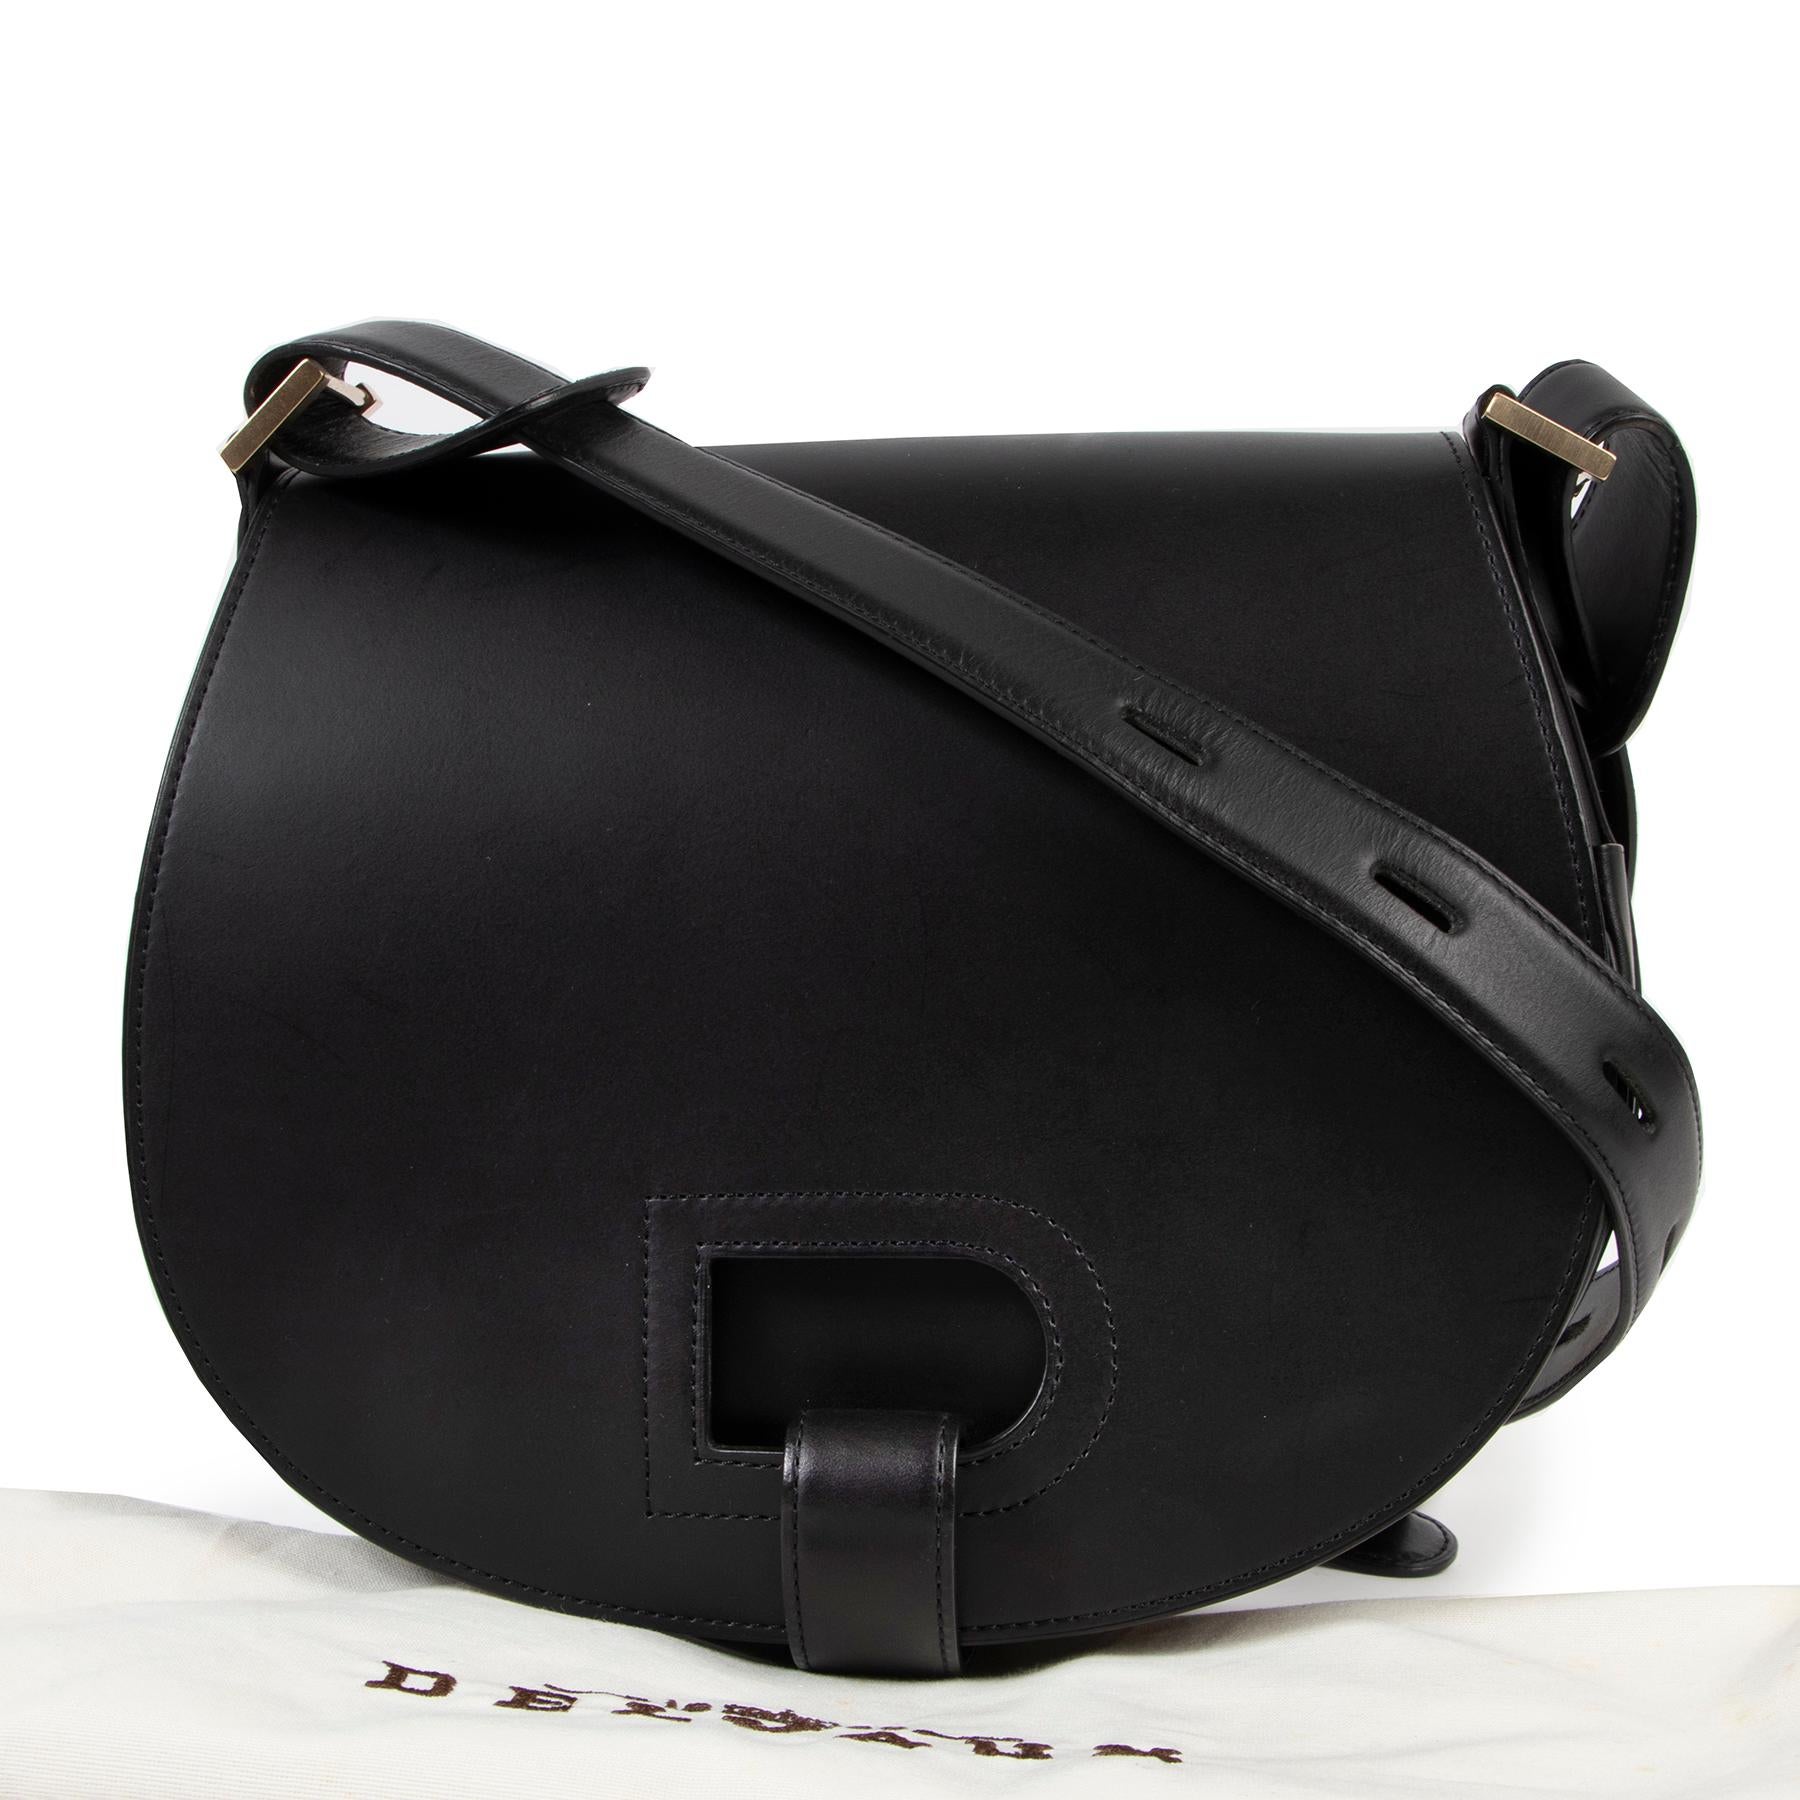 Delvaux Kate Black Crossbody Bag

We just adore this Delvaux Kate bag. 
Crafted in smooth black leather. The bag is finished with Delvaux's iconic D in the front. 
The shoulder strap is adjustable to your preferred length. 
Wear this timeless beauty